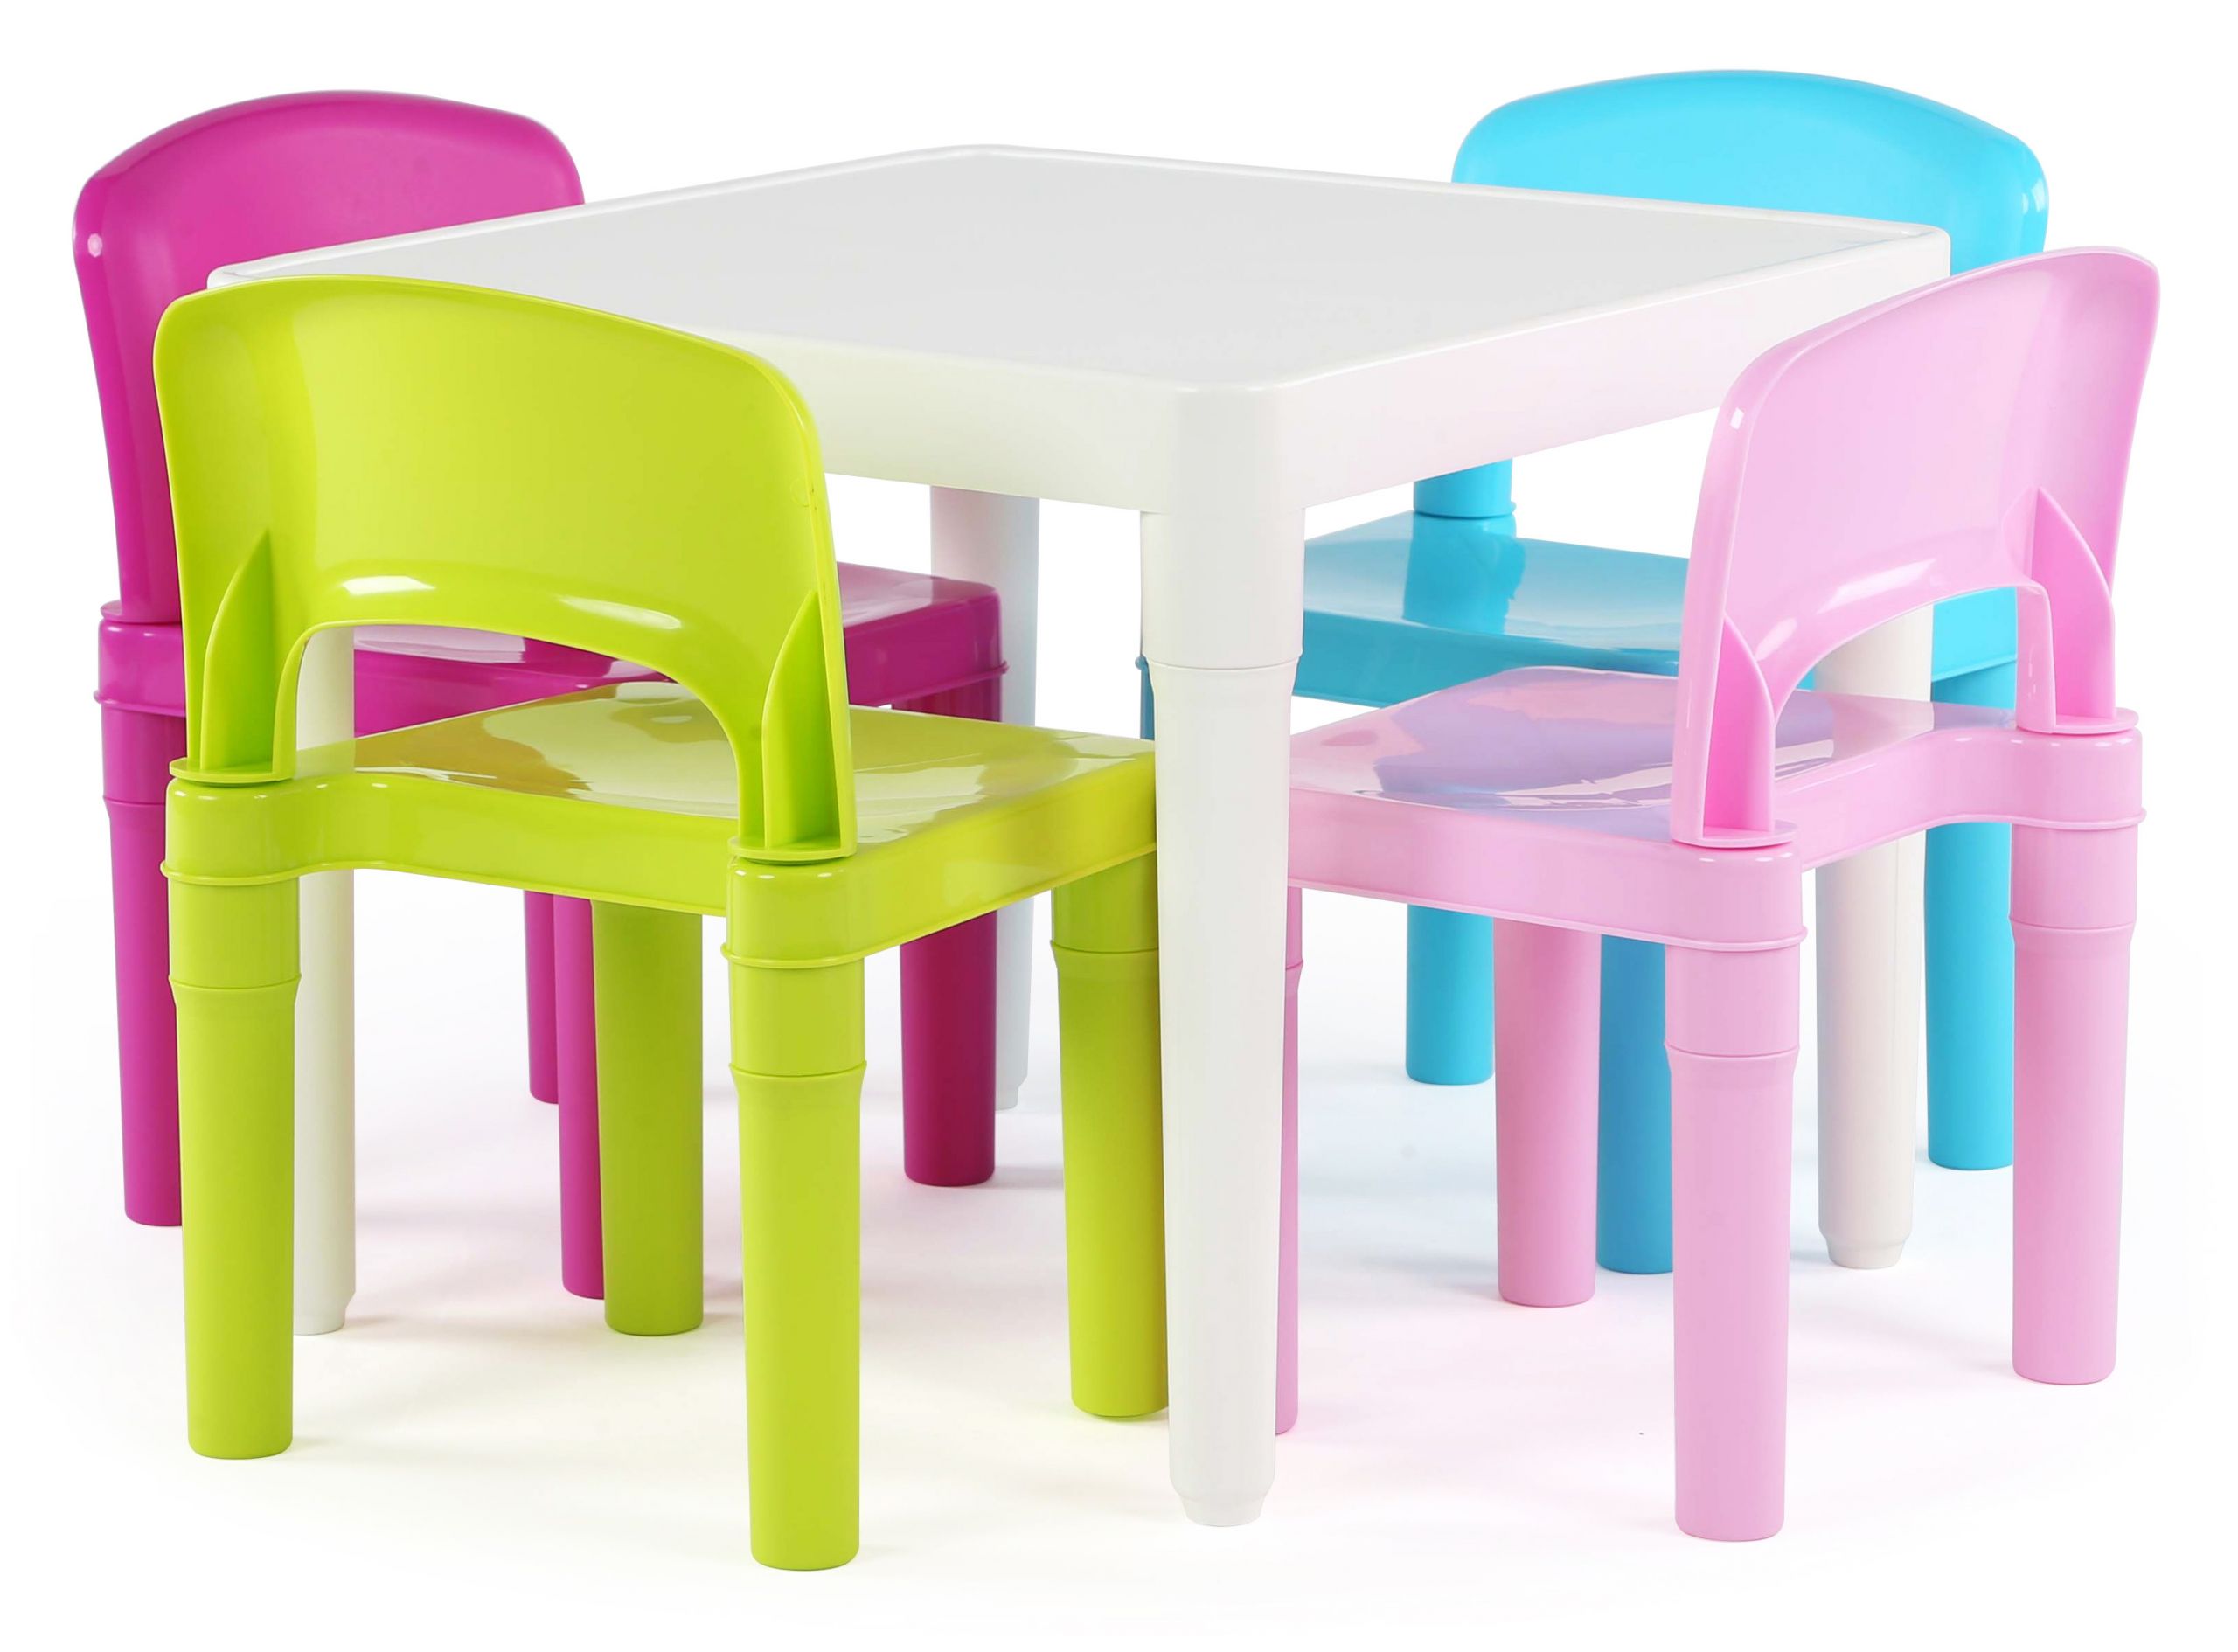 Kids Table And Chairs
 Tot Tutors Kids Plastic Table and 4 Chairs Set Bright Colors